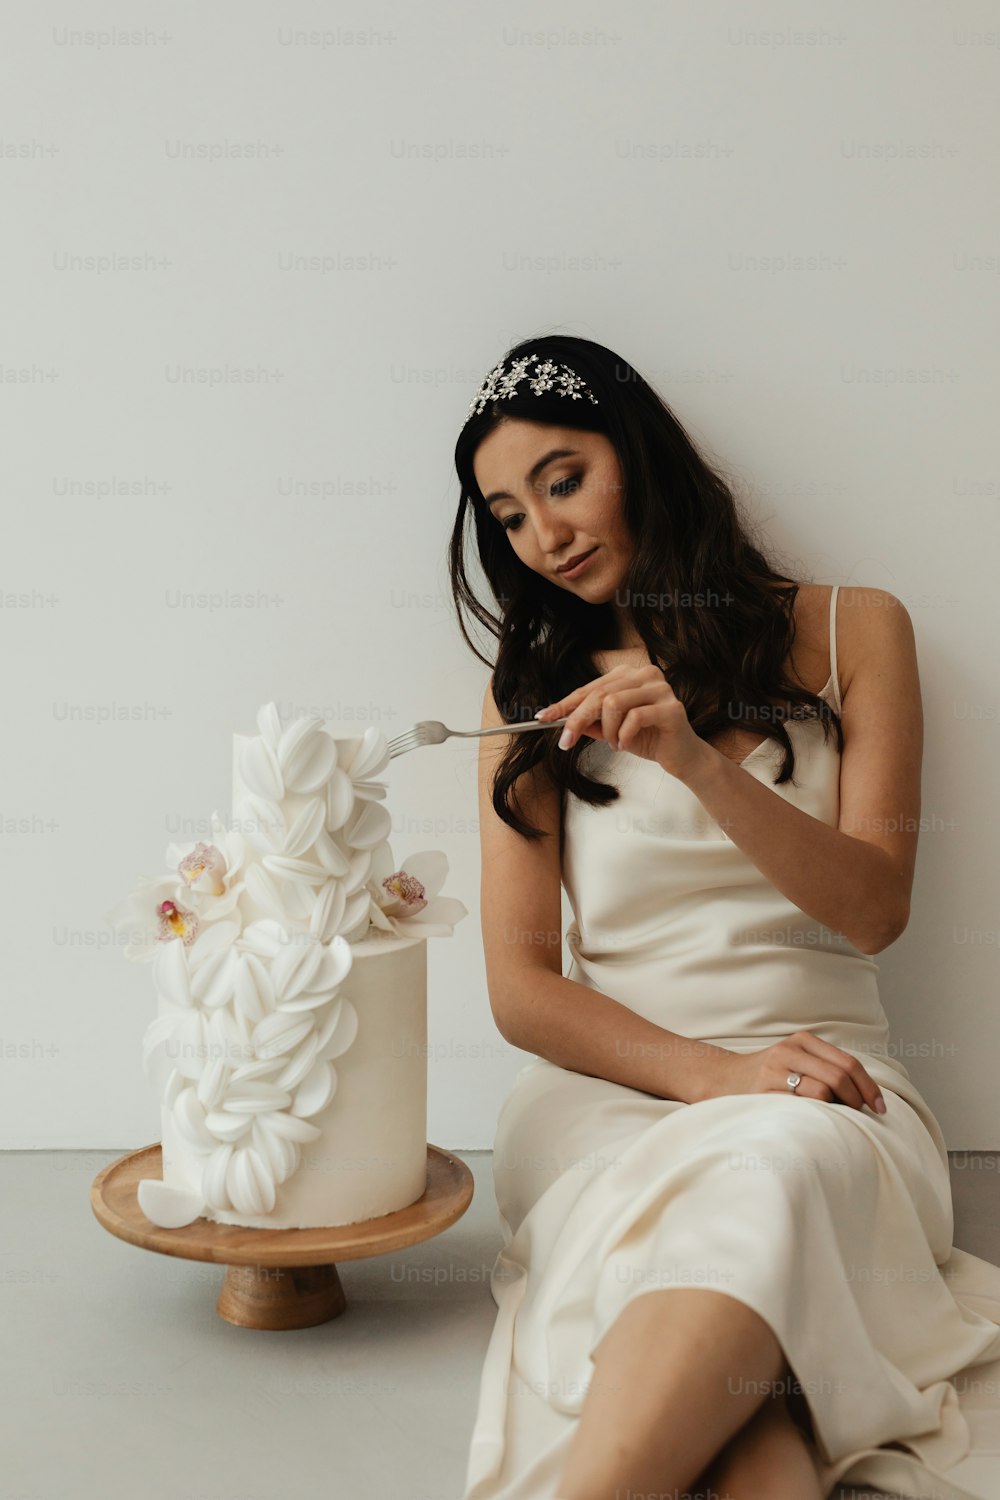 a woman in a white dress sitting next to a cake